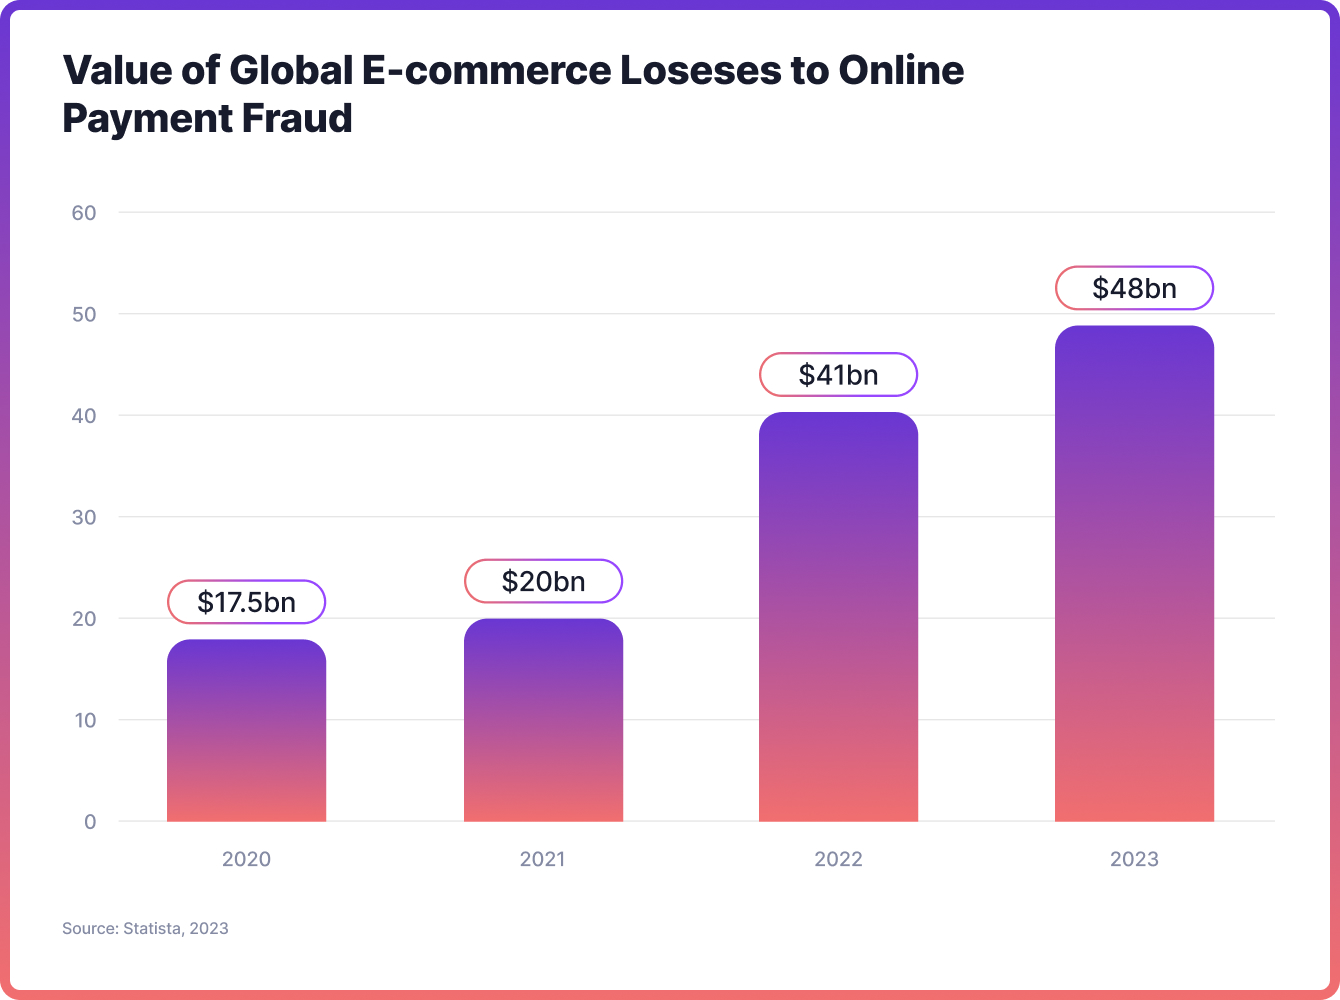 Value of global e-commerce losses to online payment fraud